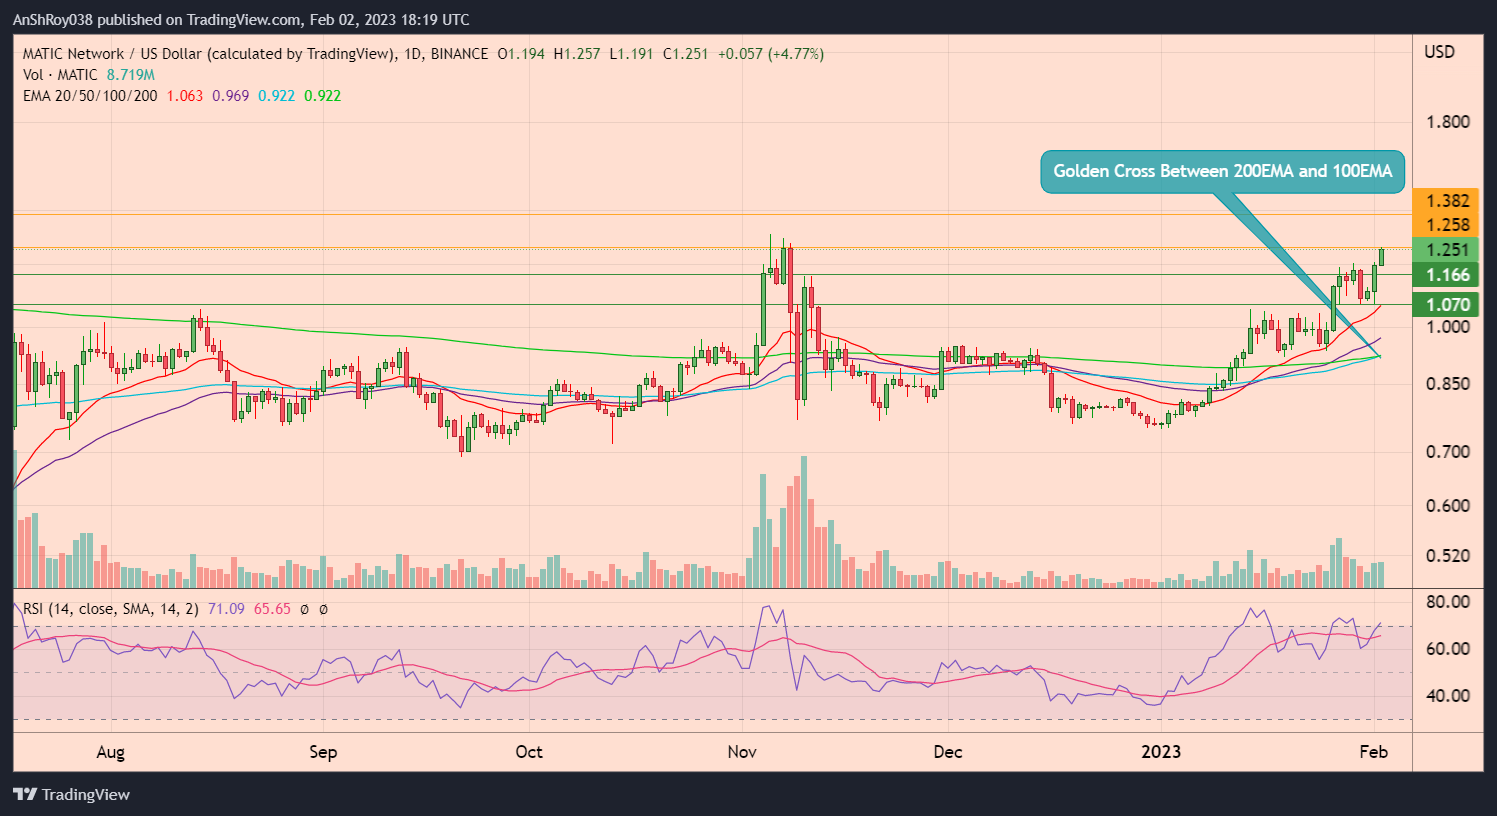 MATICUSD daily chart with RSI and a golden cross